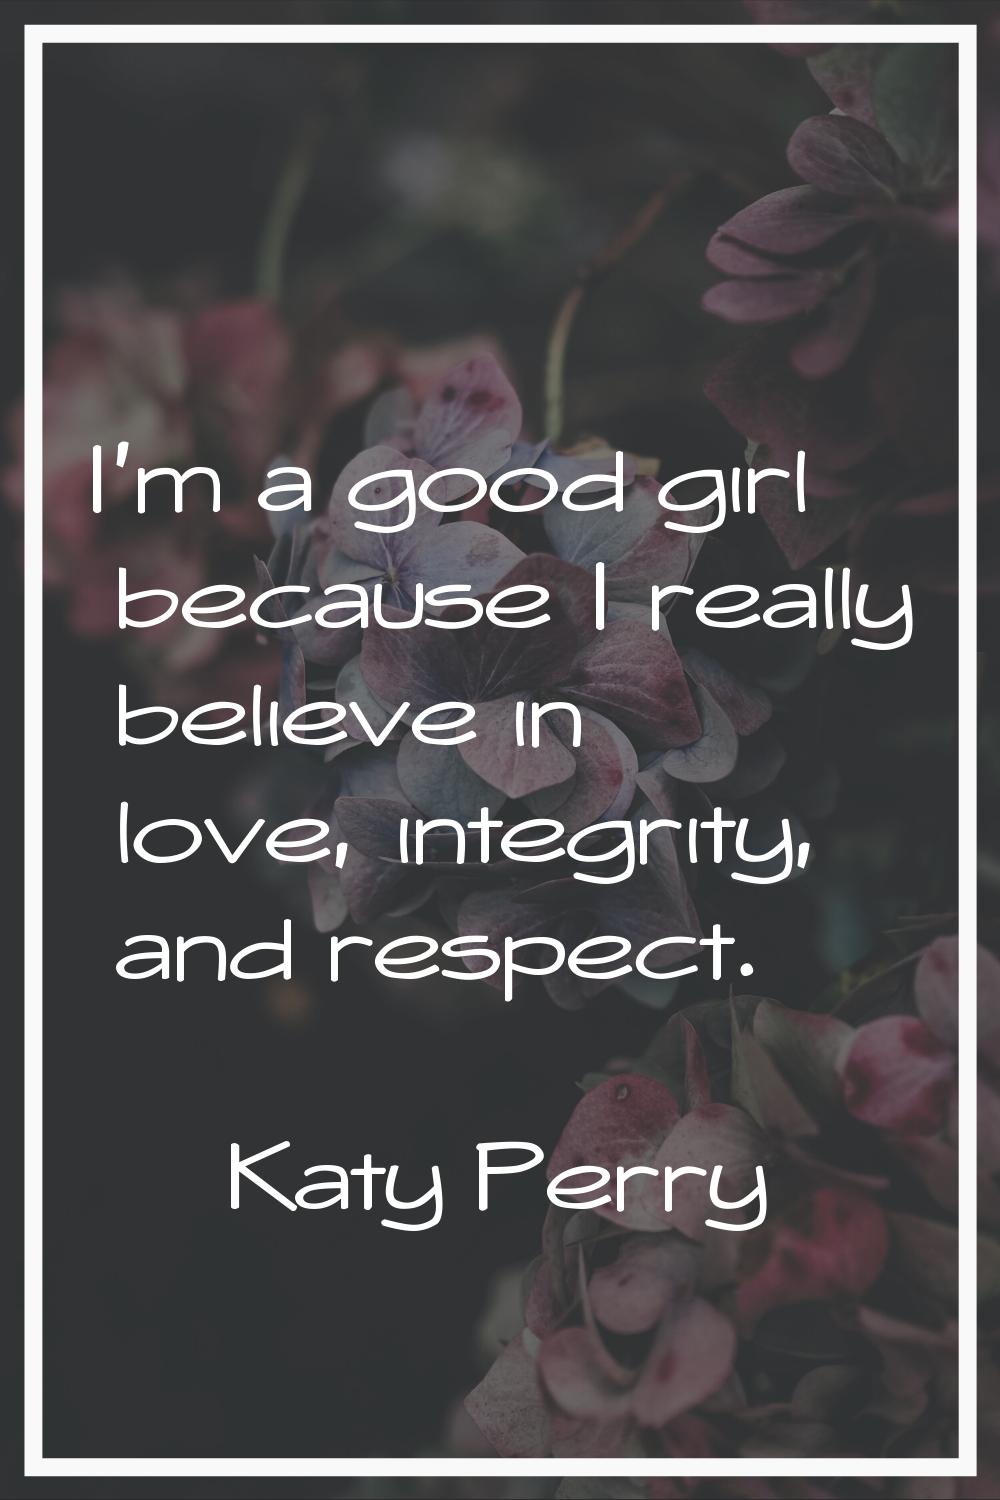 I'm a good girl because I really believe in love, integrity, and respect.